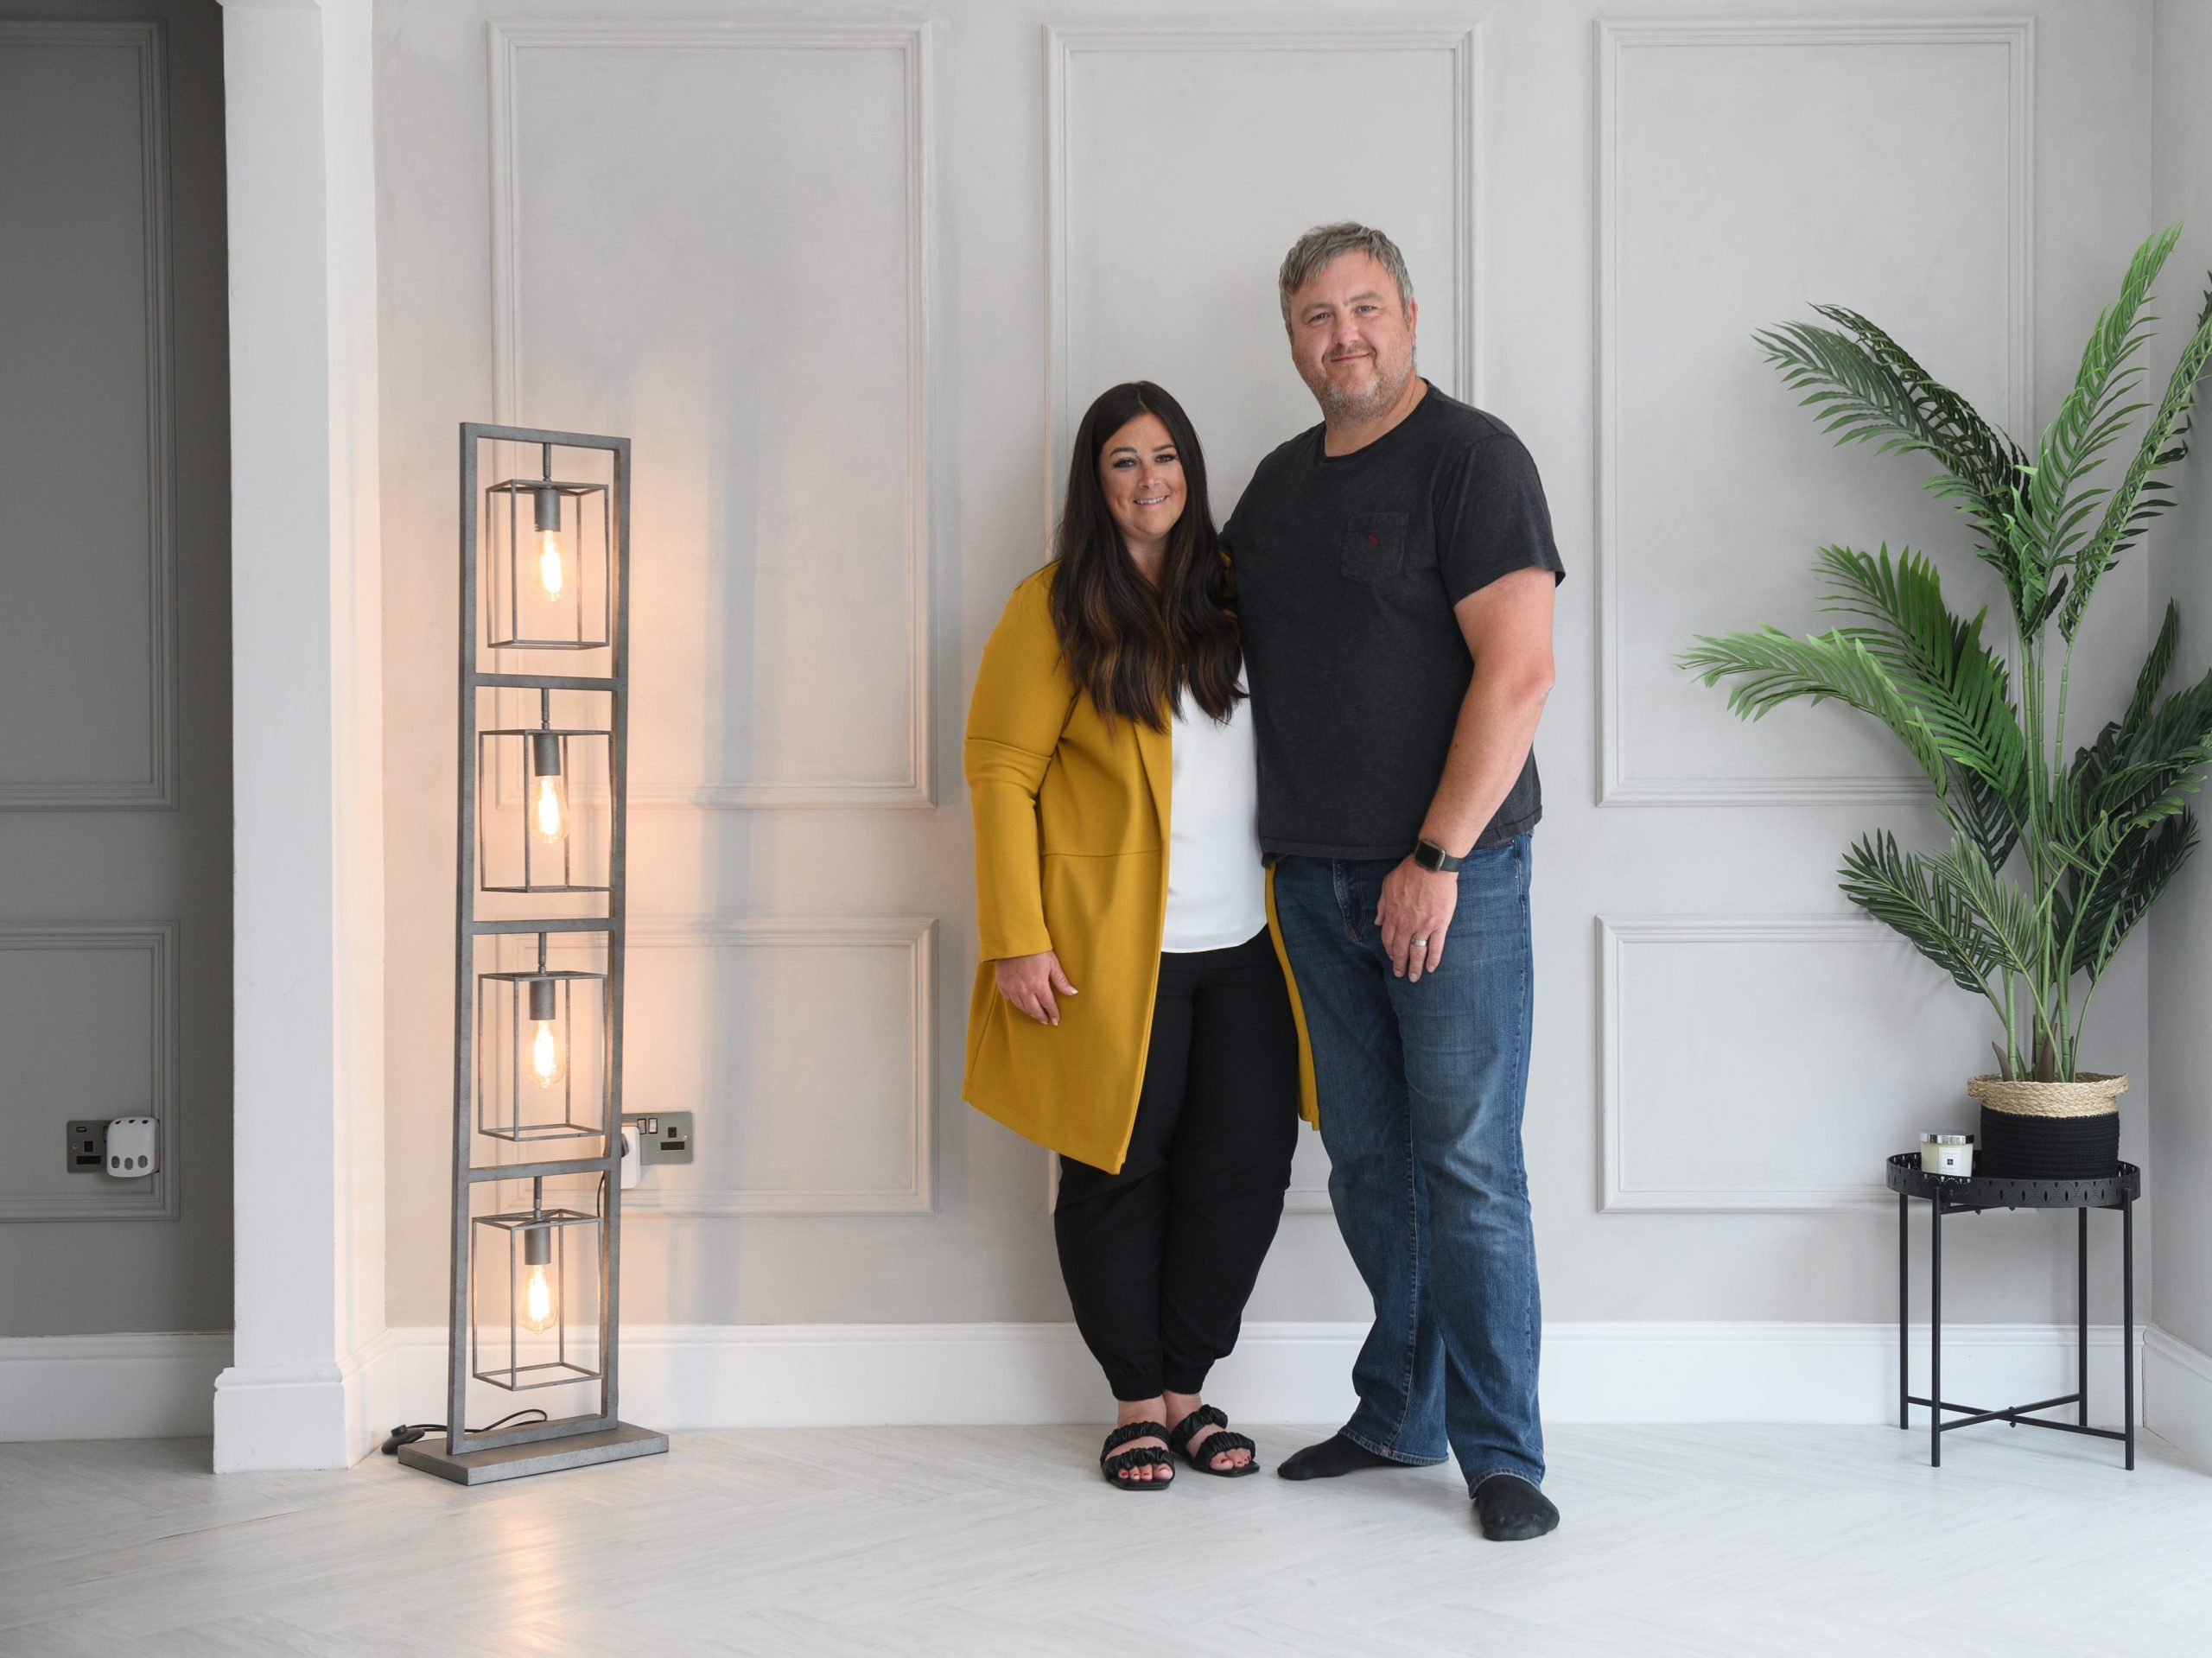 Natalie and Andrew Cunliffe pose for a photograph in their newly renovated home.